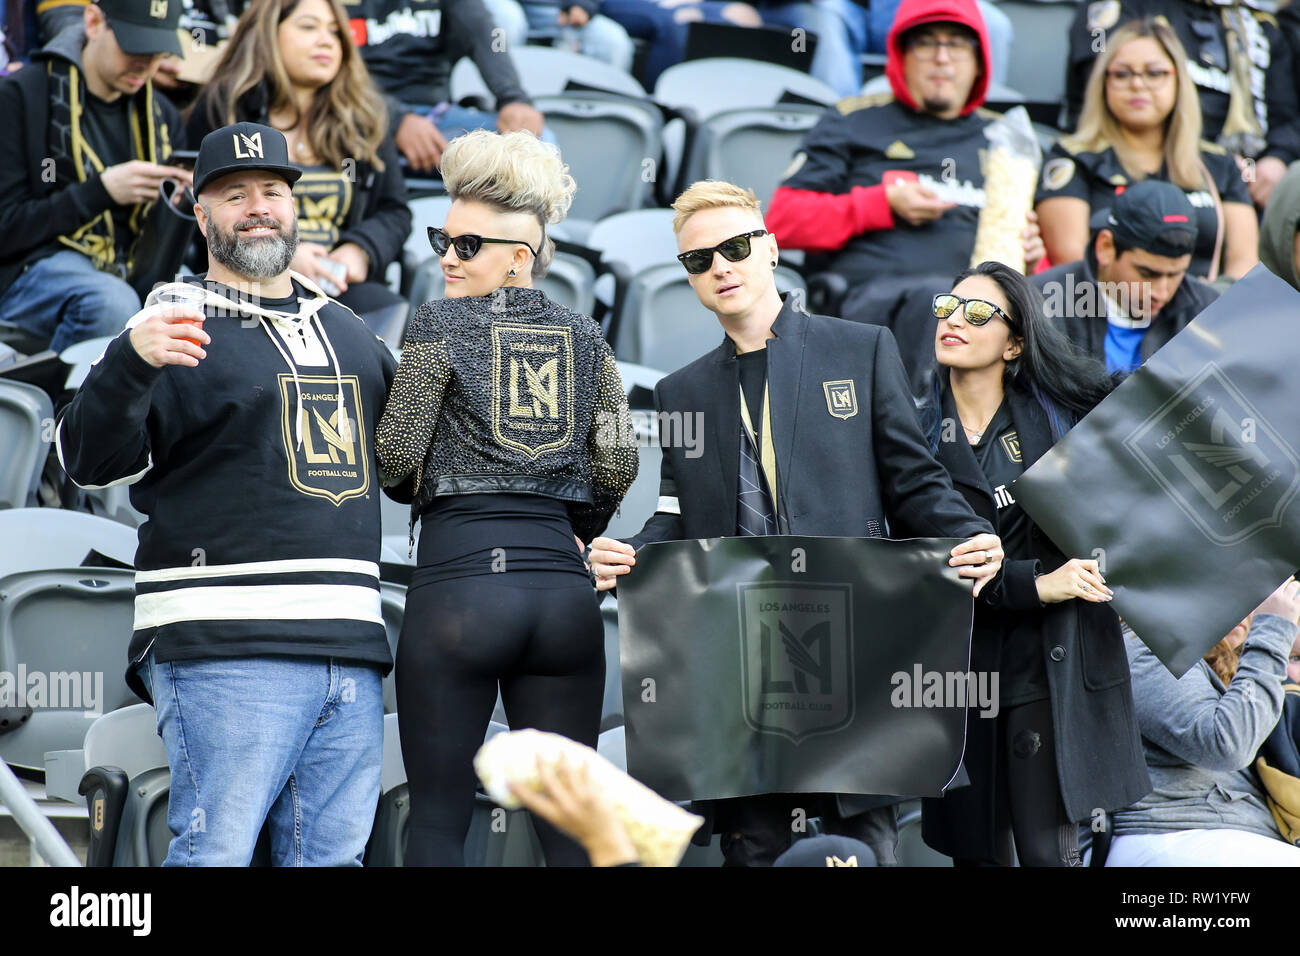 Los Angeles, CA, USA. 03rd Mar, 2019. MLS 2019: Fans during the Los Angeles  Football Club vs Sporting KC at BANC OF CALIFORNIA Stadium in Los Angeles,  Ca on March 03, 2019.